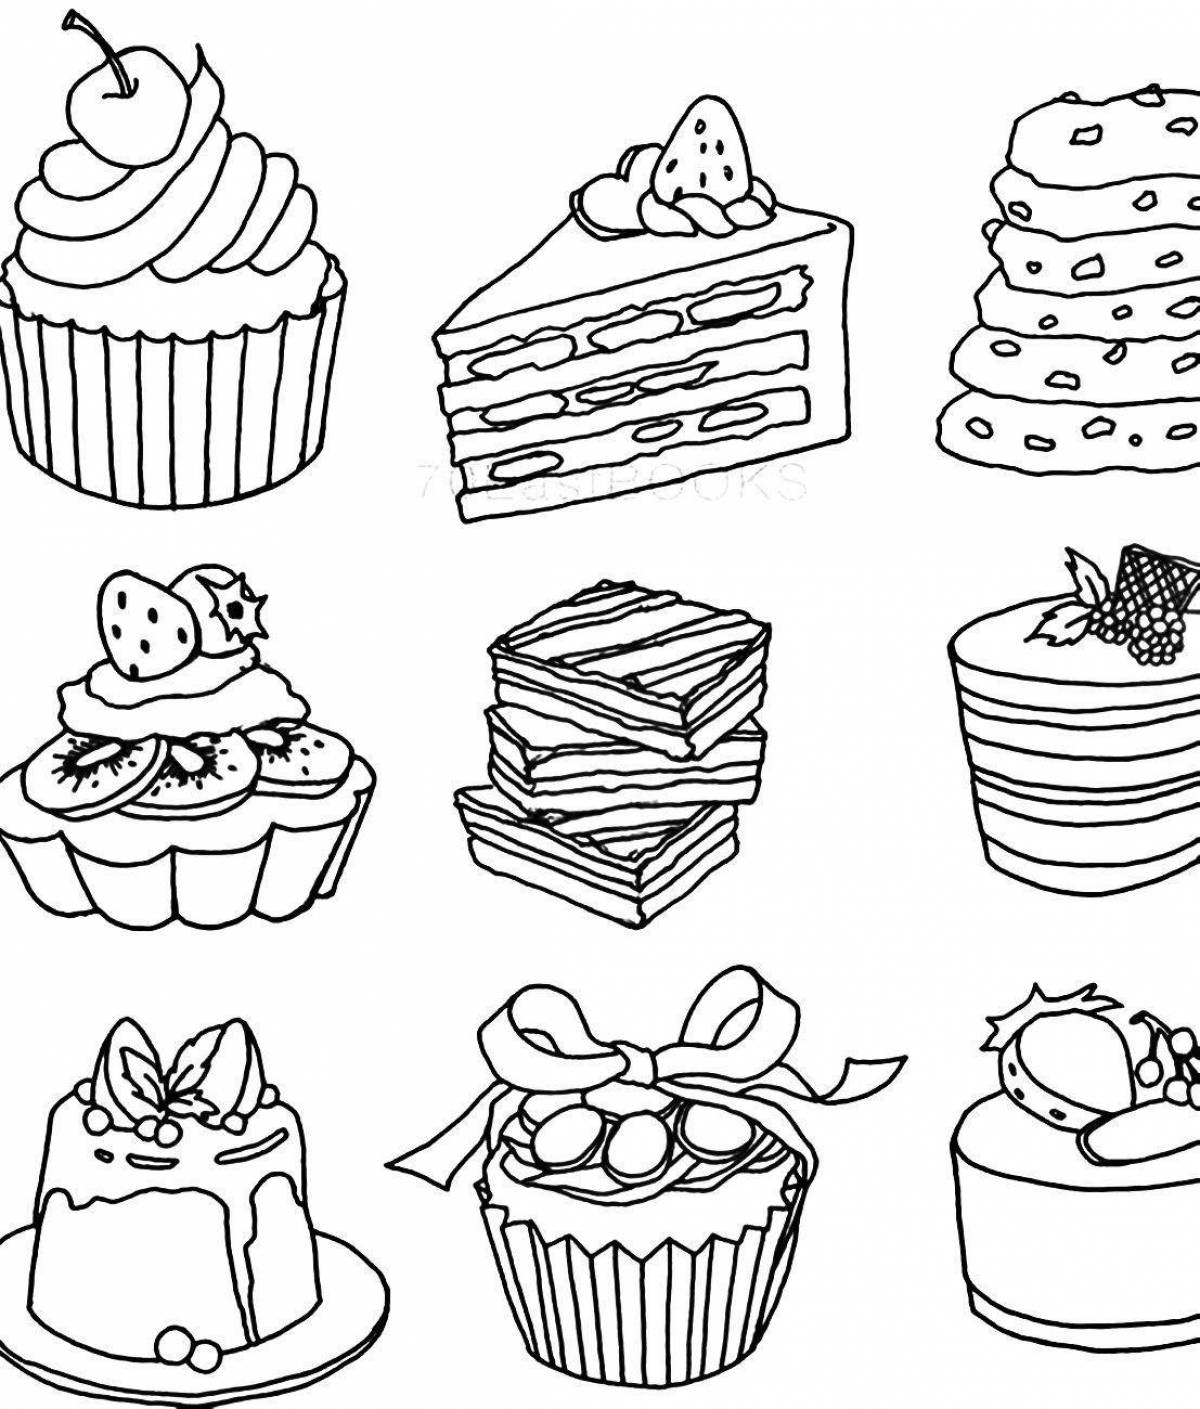 Adorable cupcake coloring page